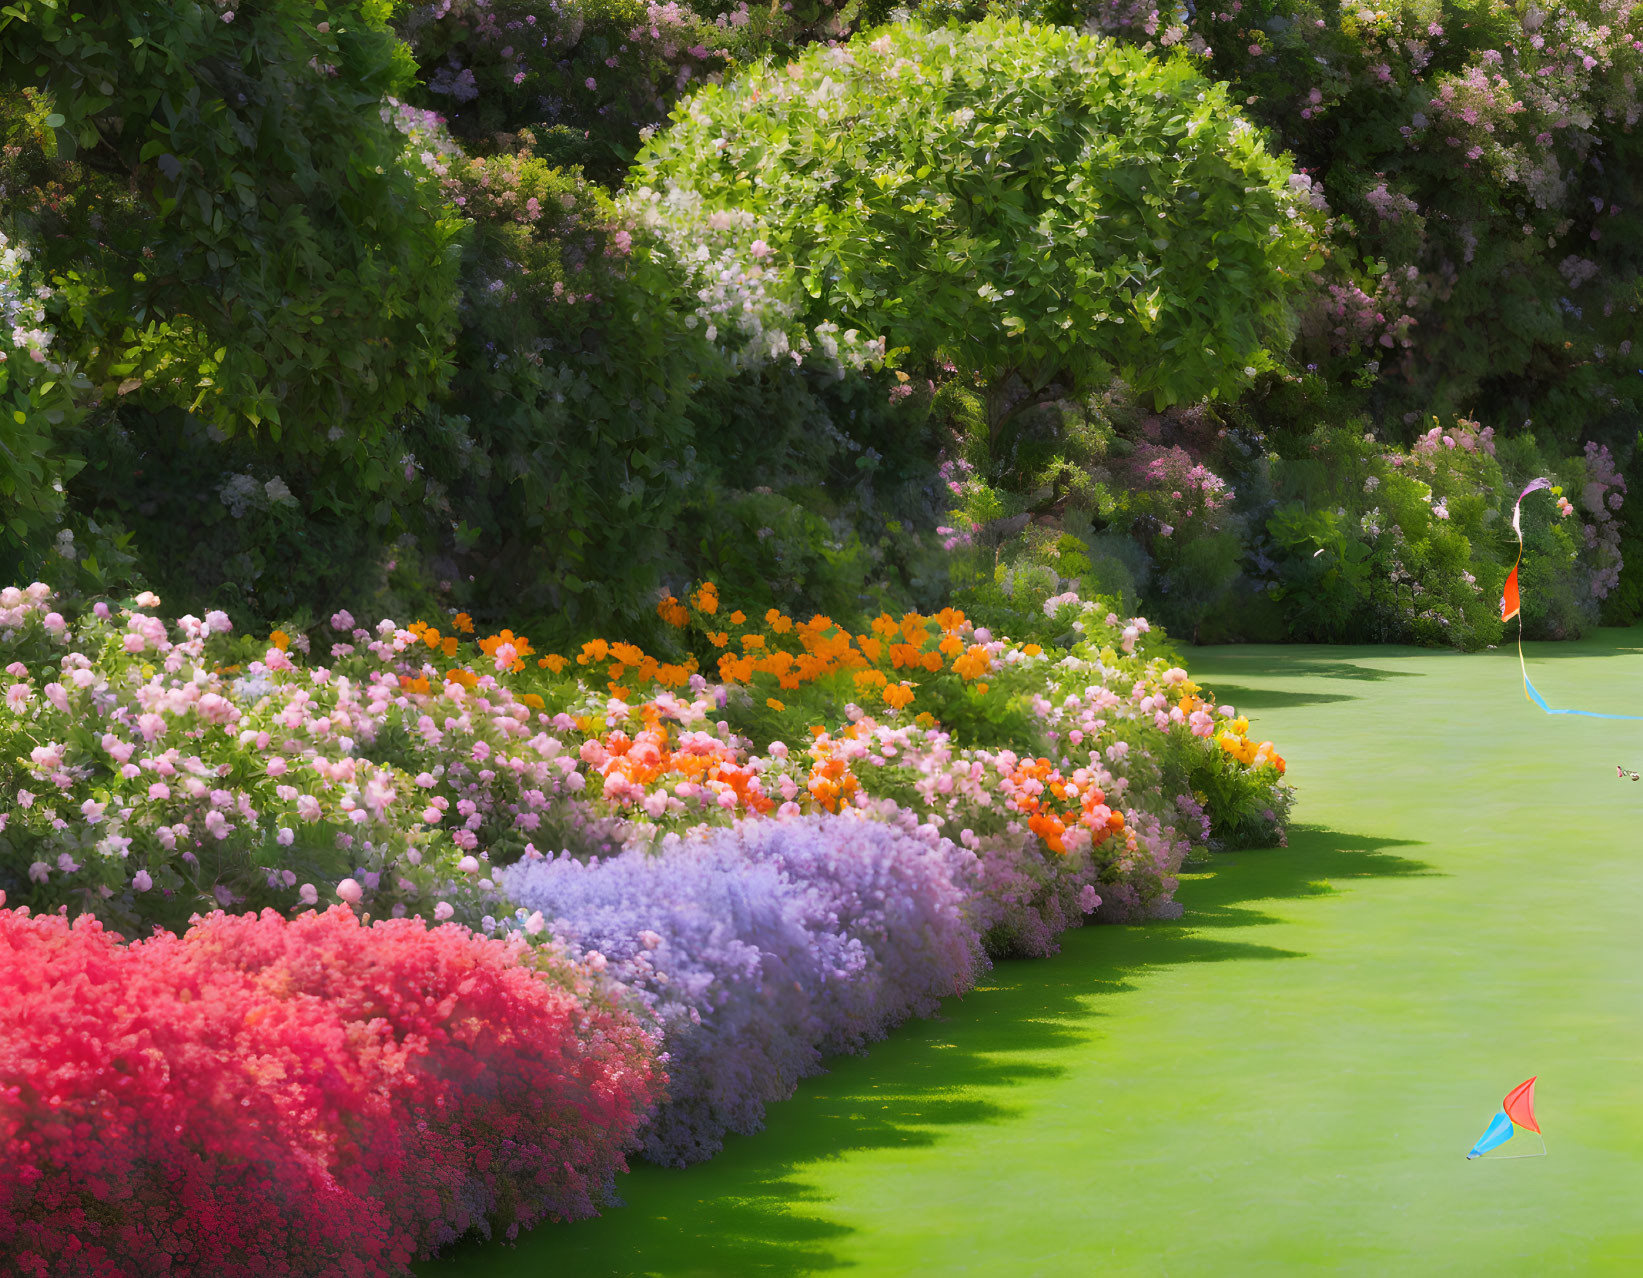 Colorful garden with pink, orange, and purple flowers under sunny skies